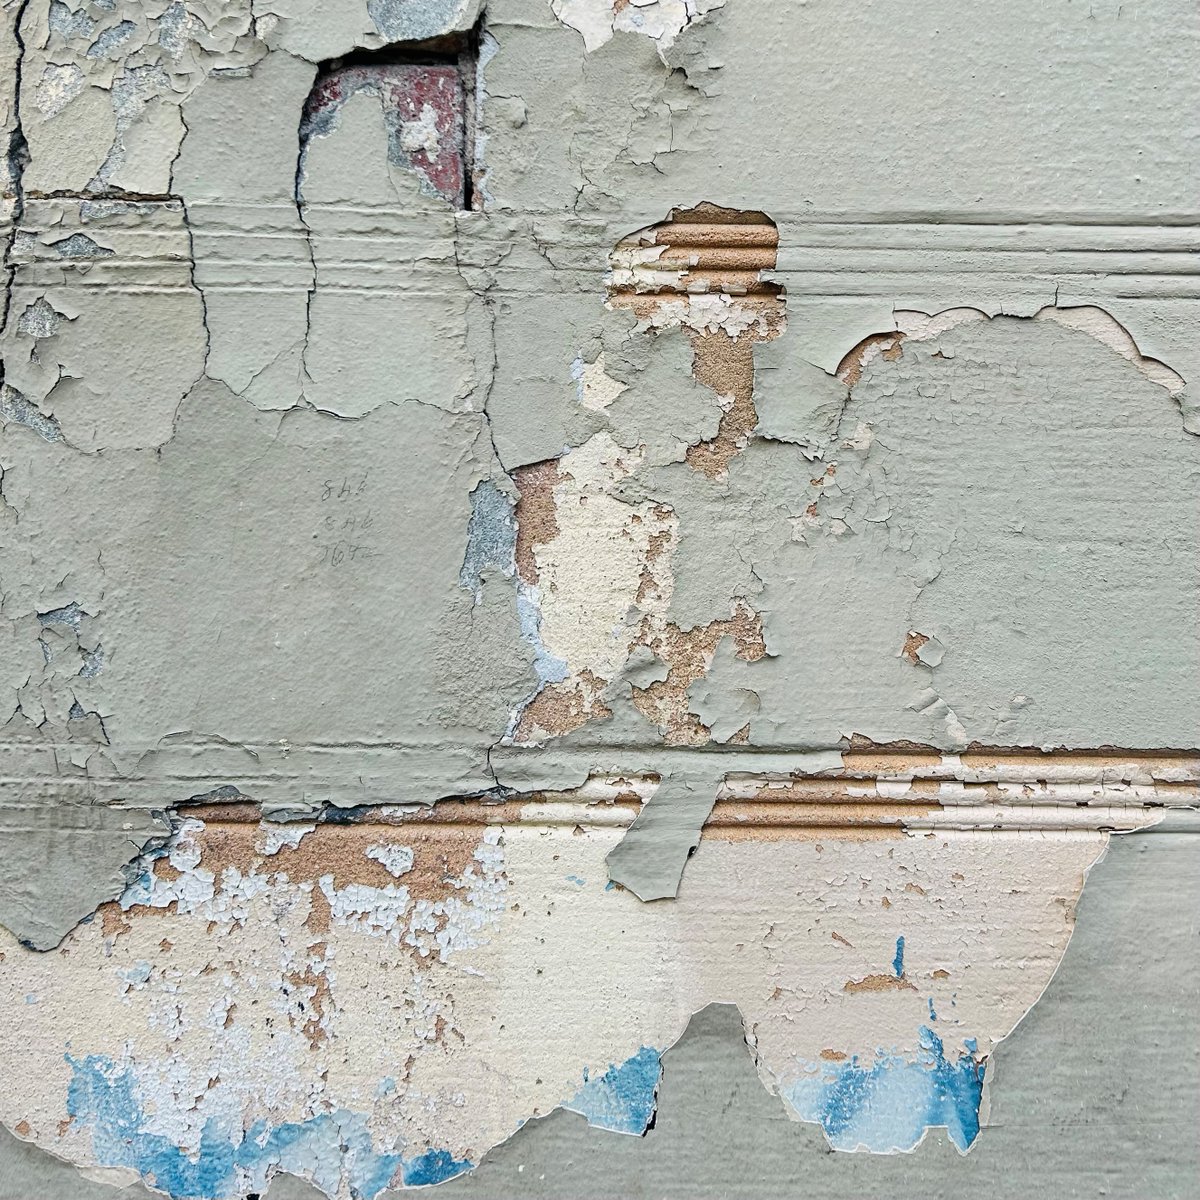 This Construction Safety Week, we're hosting a webinar for property owners to know when & how to use certified contractors for lead-based paint work! If you own a building built before 1978, join us Thursday for an overview of Safe Work Practices: bit.ly/4b5Fk20